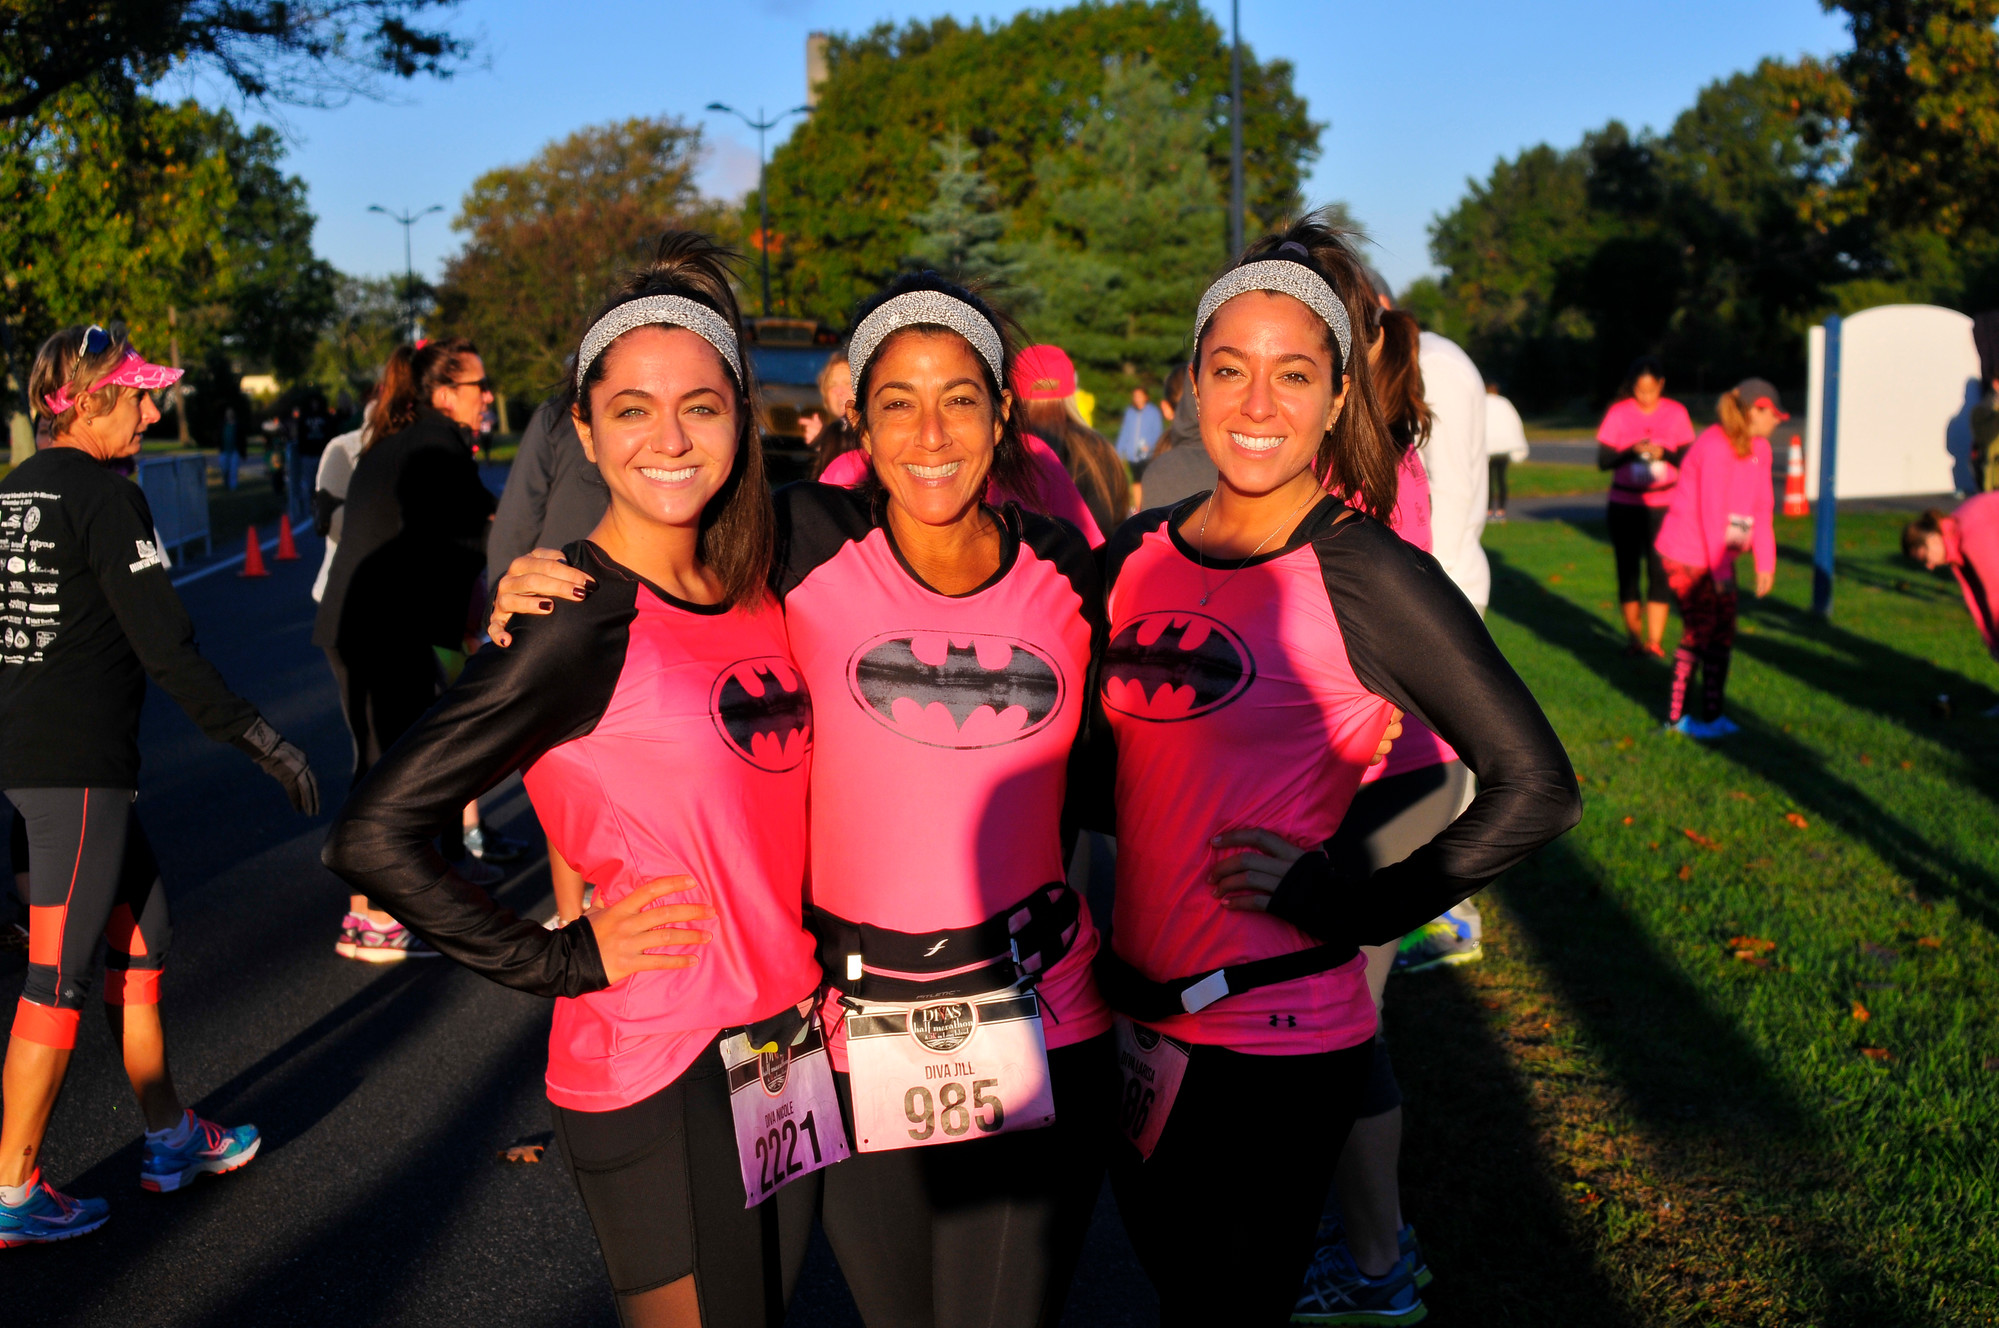 Nicole, Jill and Larisa Madison, left to right, of North Bellmore donned pink Bat Girl outfits for the race.